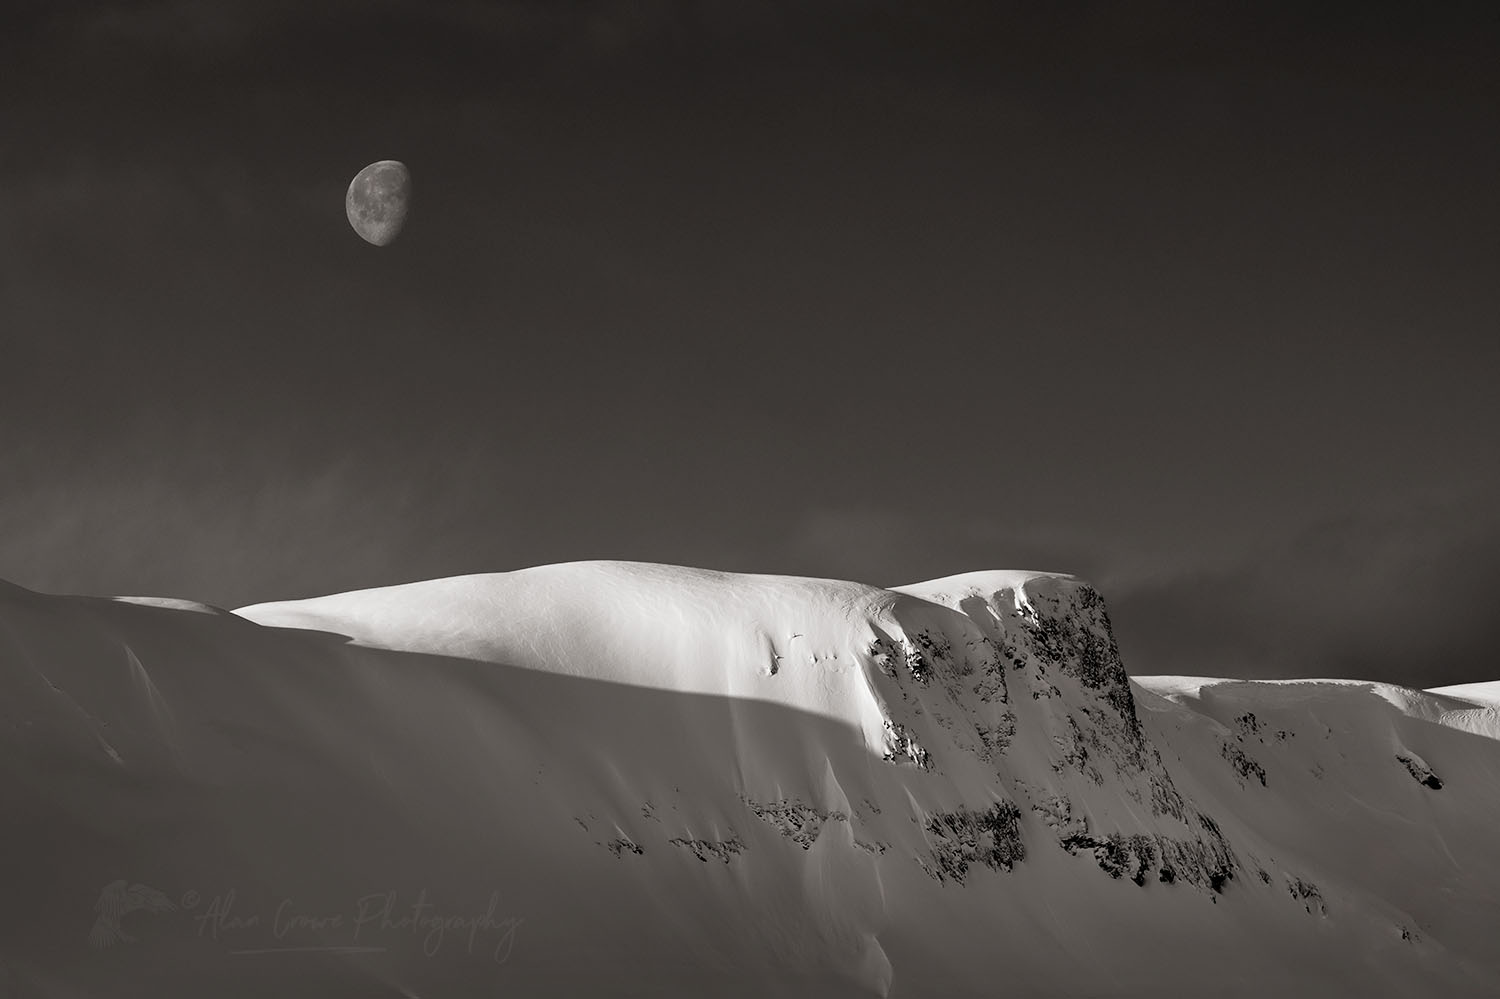 Moon over Table Mountain in winter. Heather Meadows Recreation Area, Mt. Baker-Snoqualmie National Forest, North Cascades Washington #77155bw